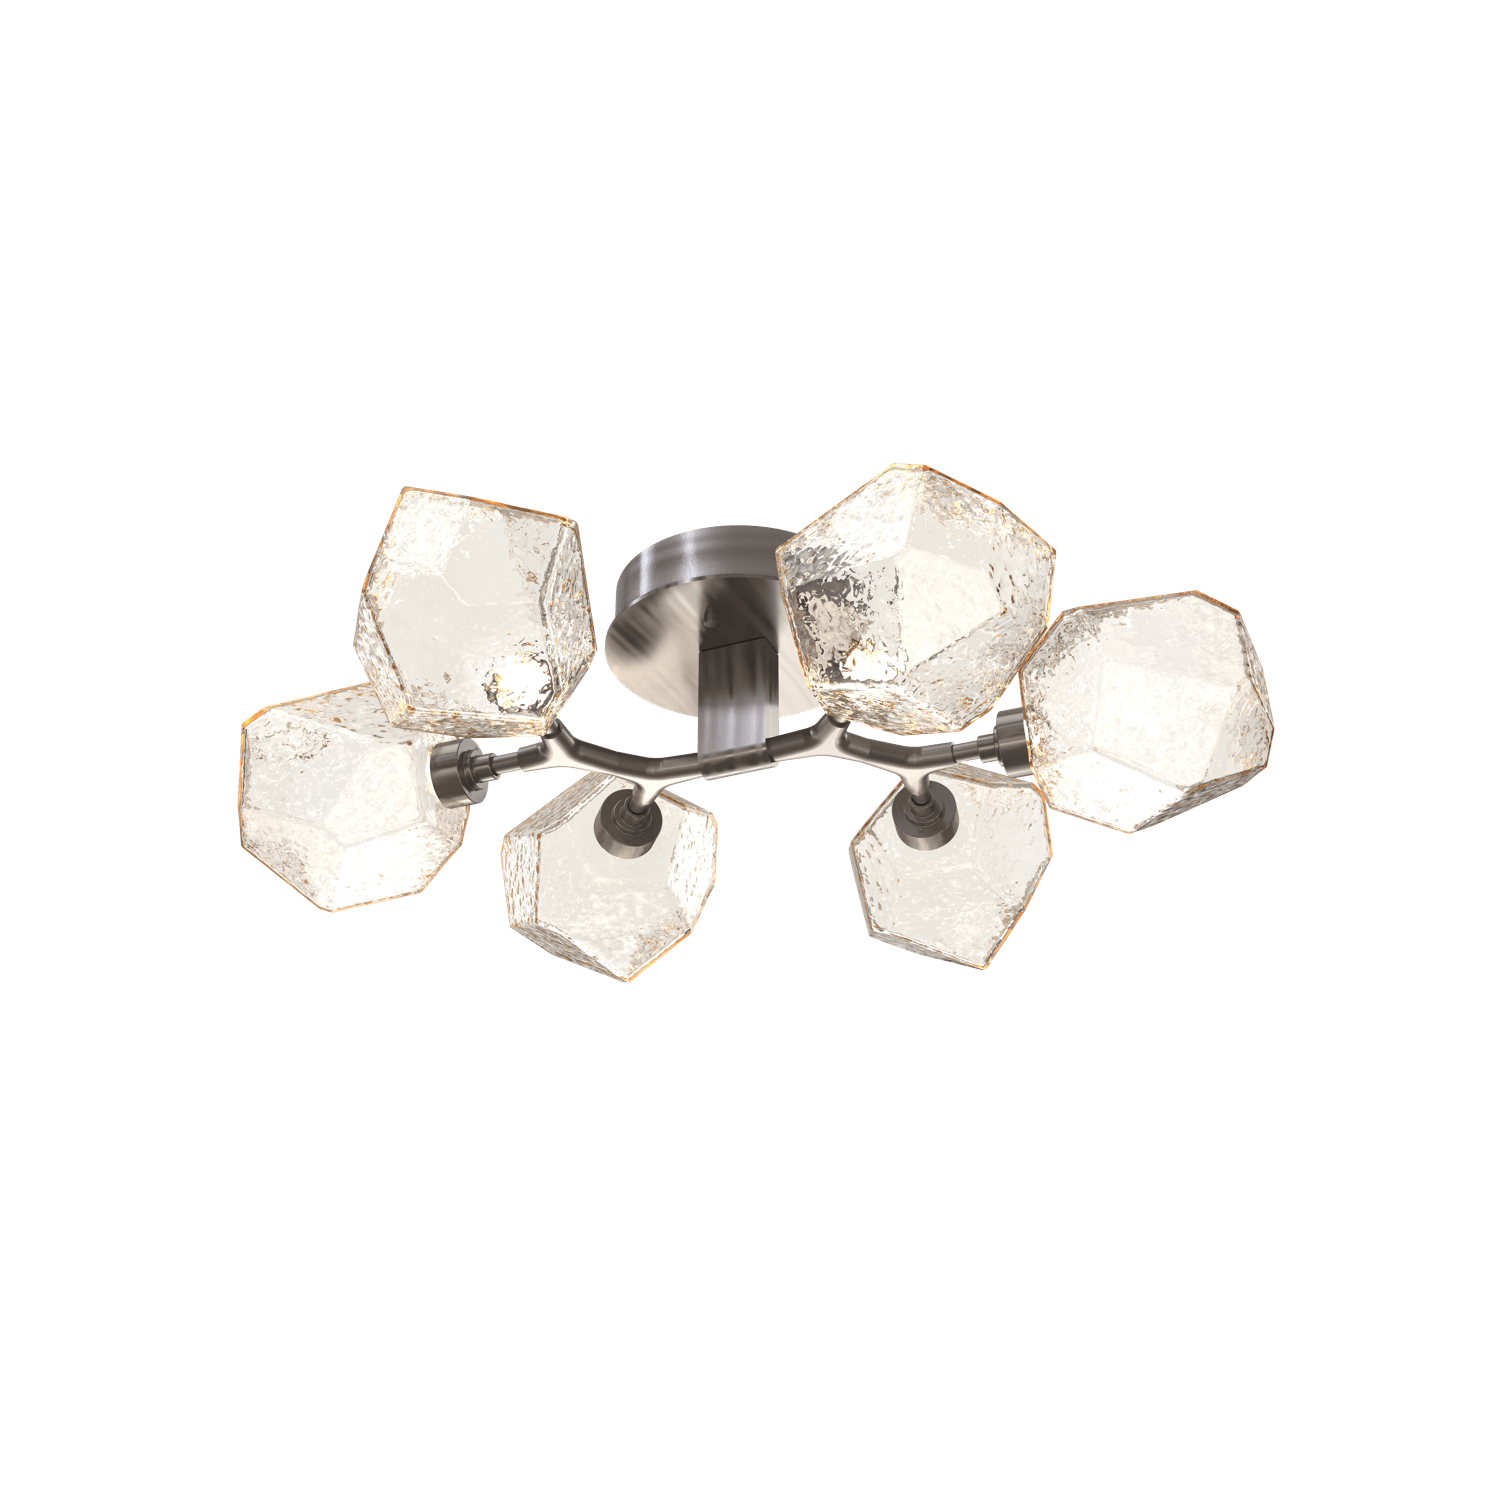 CLB0039-01-GM-A-Hammerton-Studio-Gem-6-light-organic-flush-mount-light-with-gunmetal-finish-and-amber-blown-glass-shades-and-LED-lamping